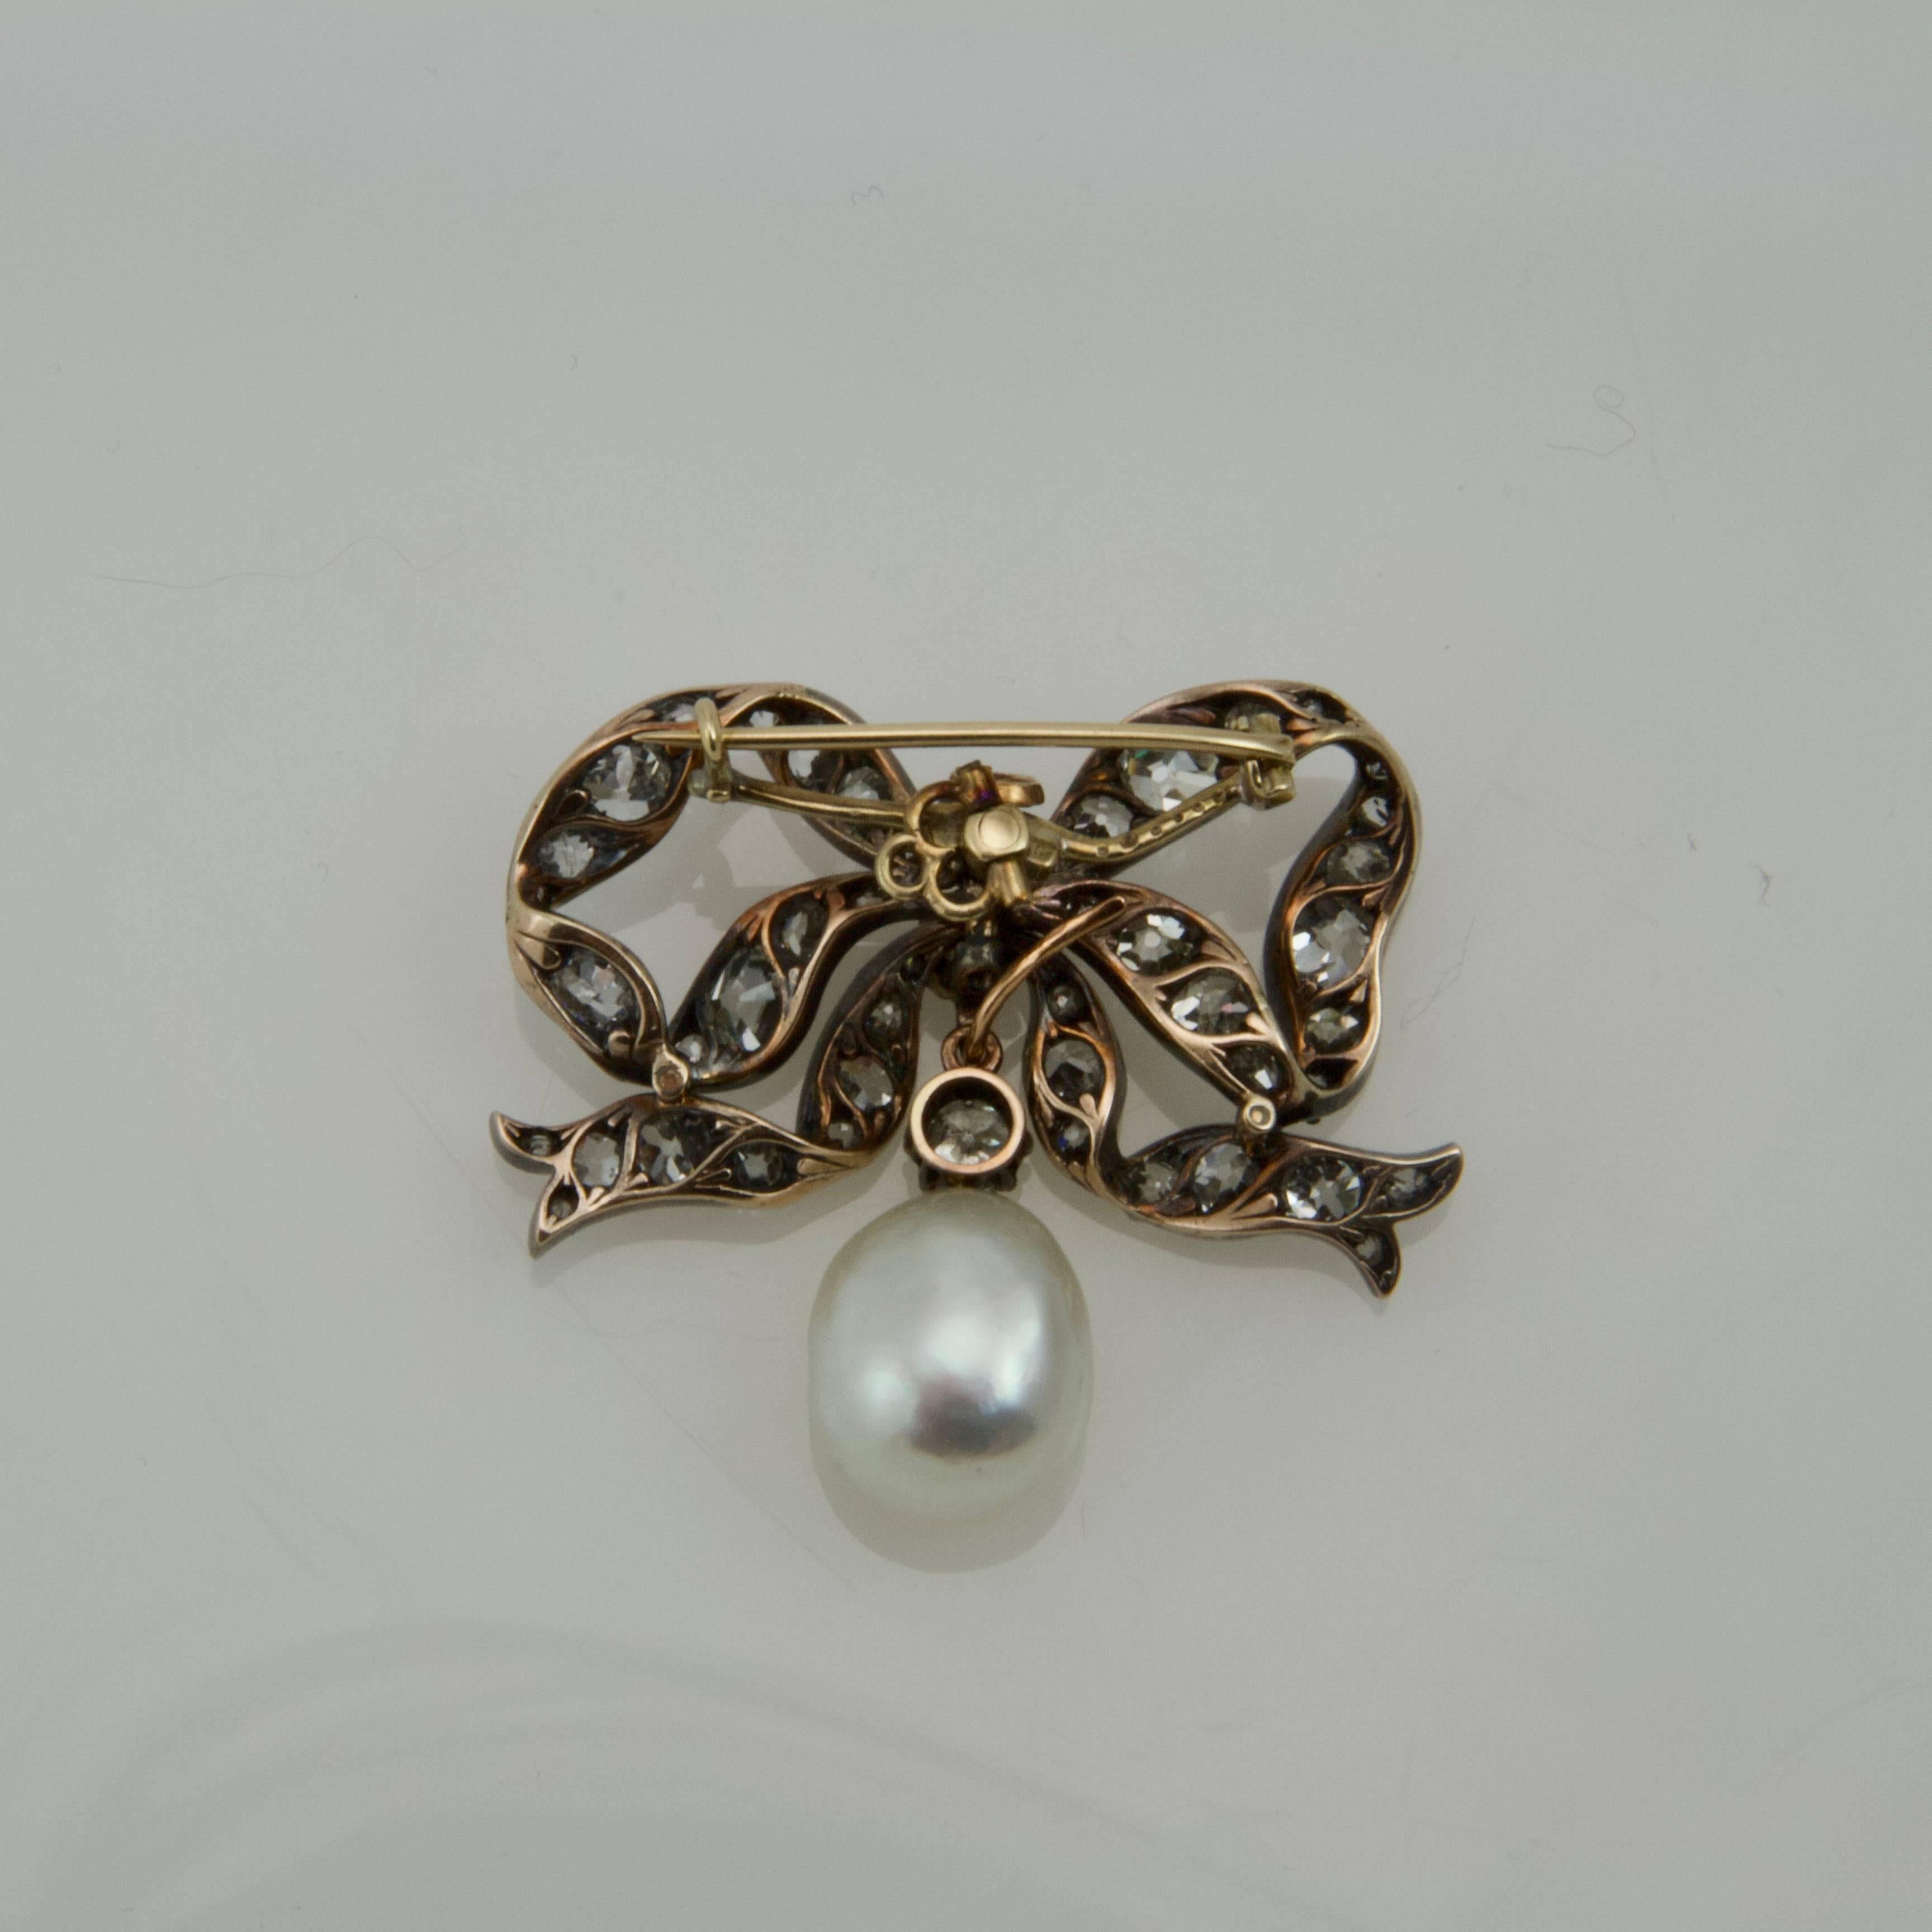 Antique-cut diamond set on gold and silver bow brooch. Removable pear-shaped cultured pearl. 
Possible to wear in pendant ( brooch system removable)
Weight of diamonds almost 5 carats. Quality fair.
Pearl size: 1.2 x 1.5 cm
French recense